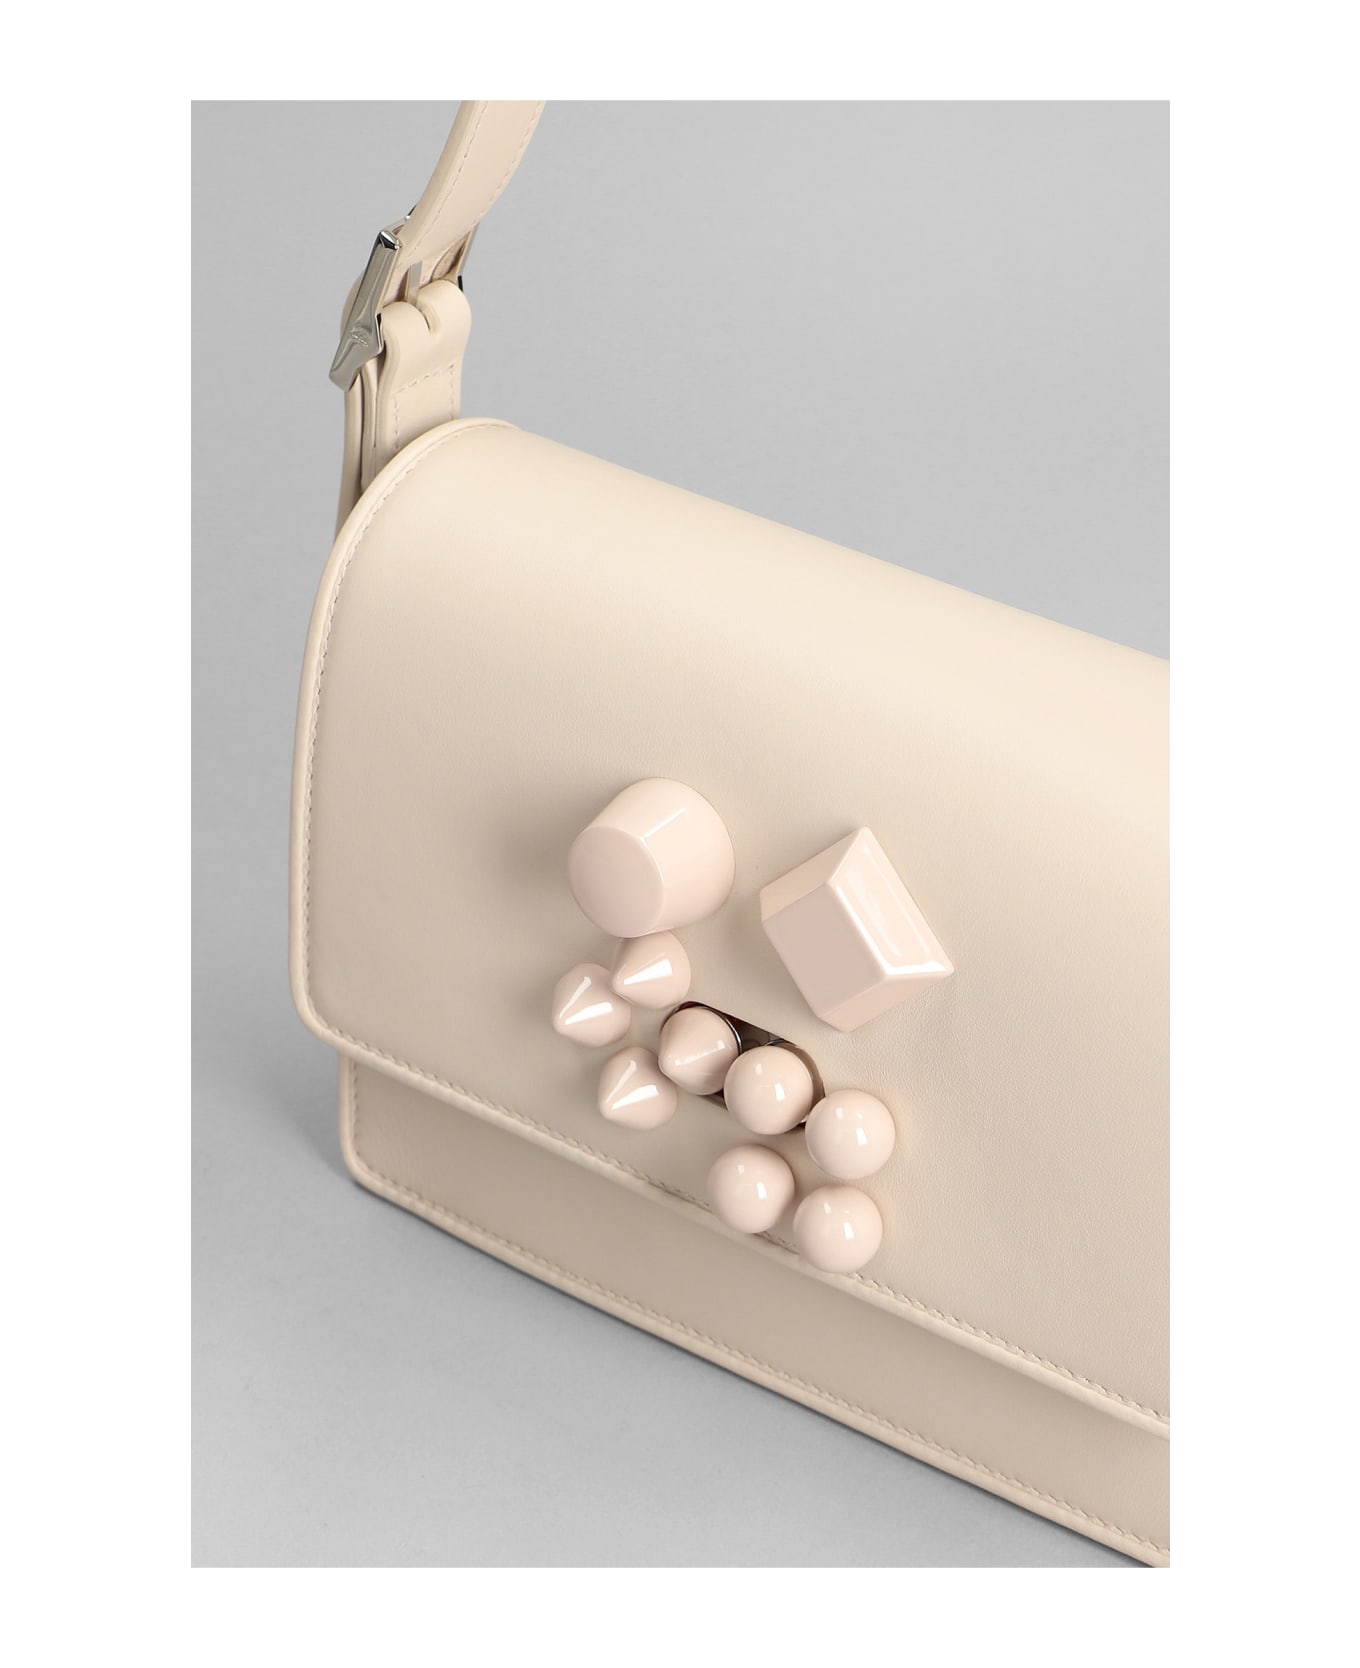 Christian Louboutin Carasky Shoulder Bag In Powder Leather - Nude & Neutrals